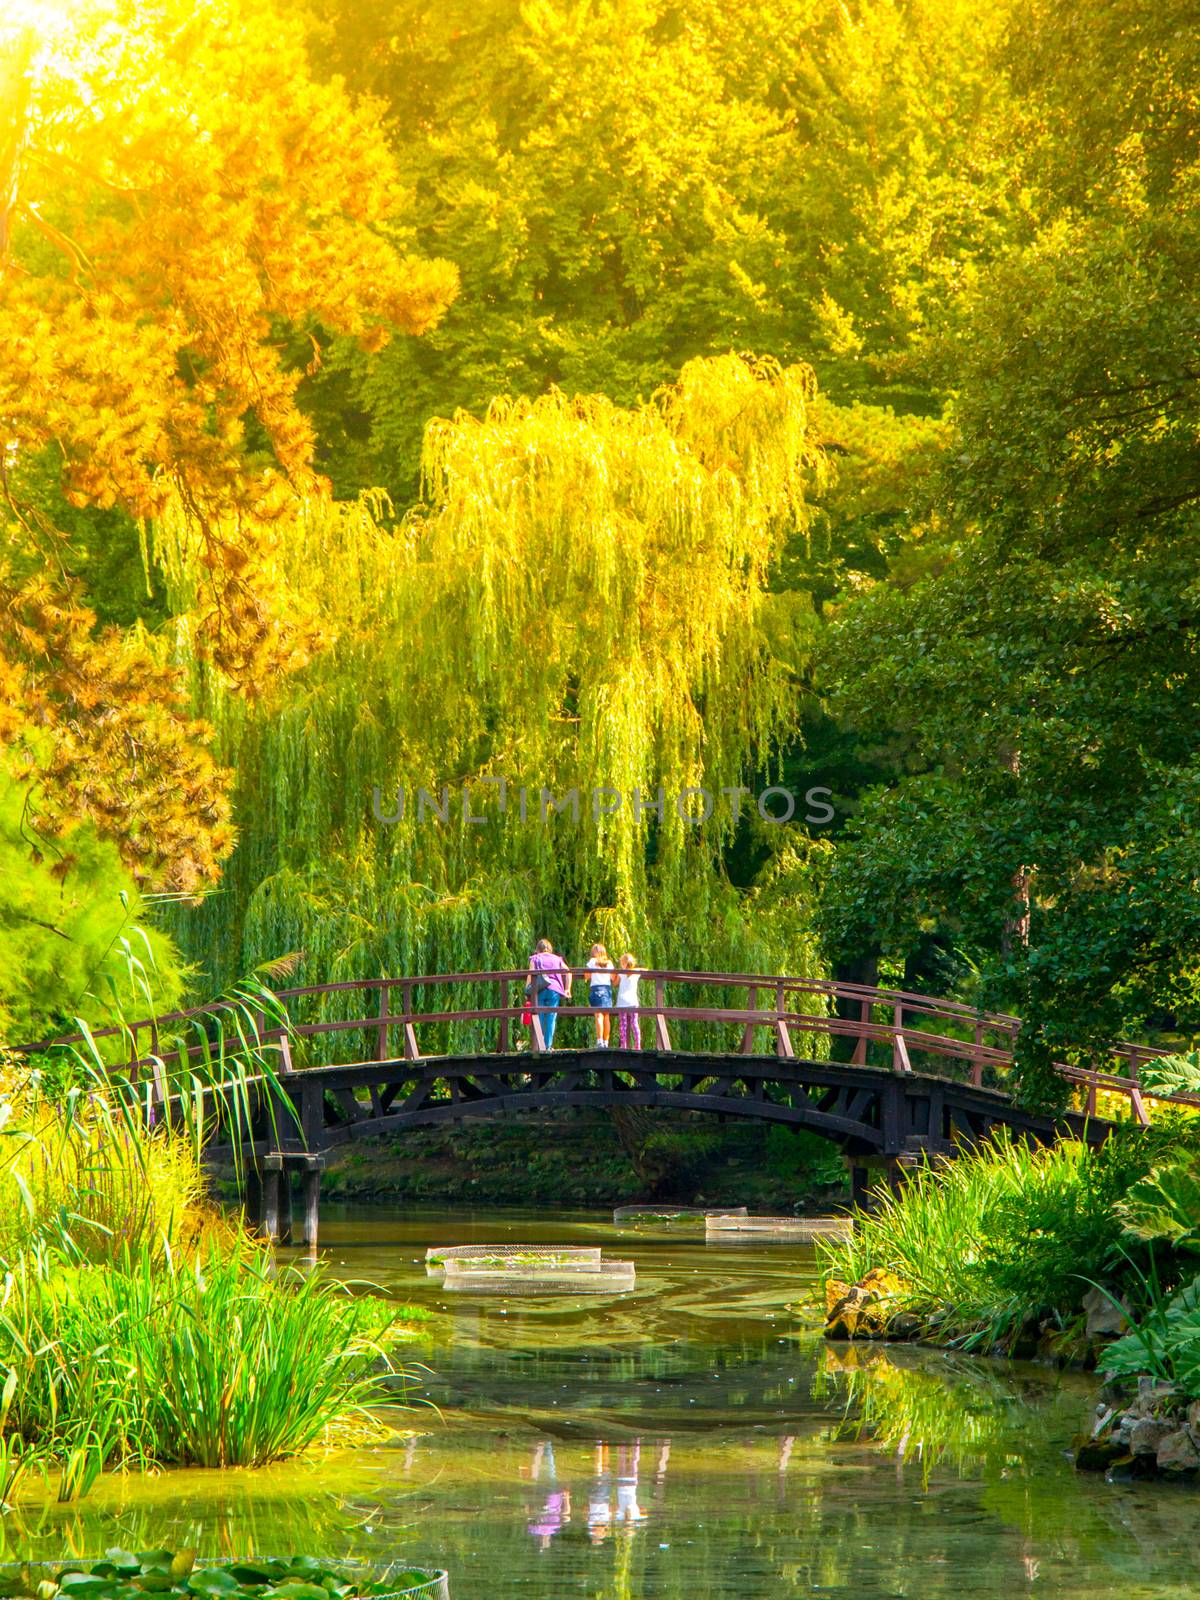 People standing on the small wooden bridge over park pond in lush greenery of botanical garden.